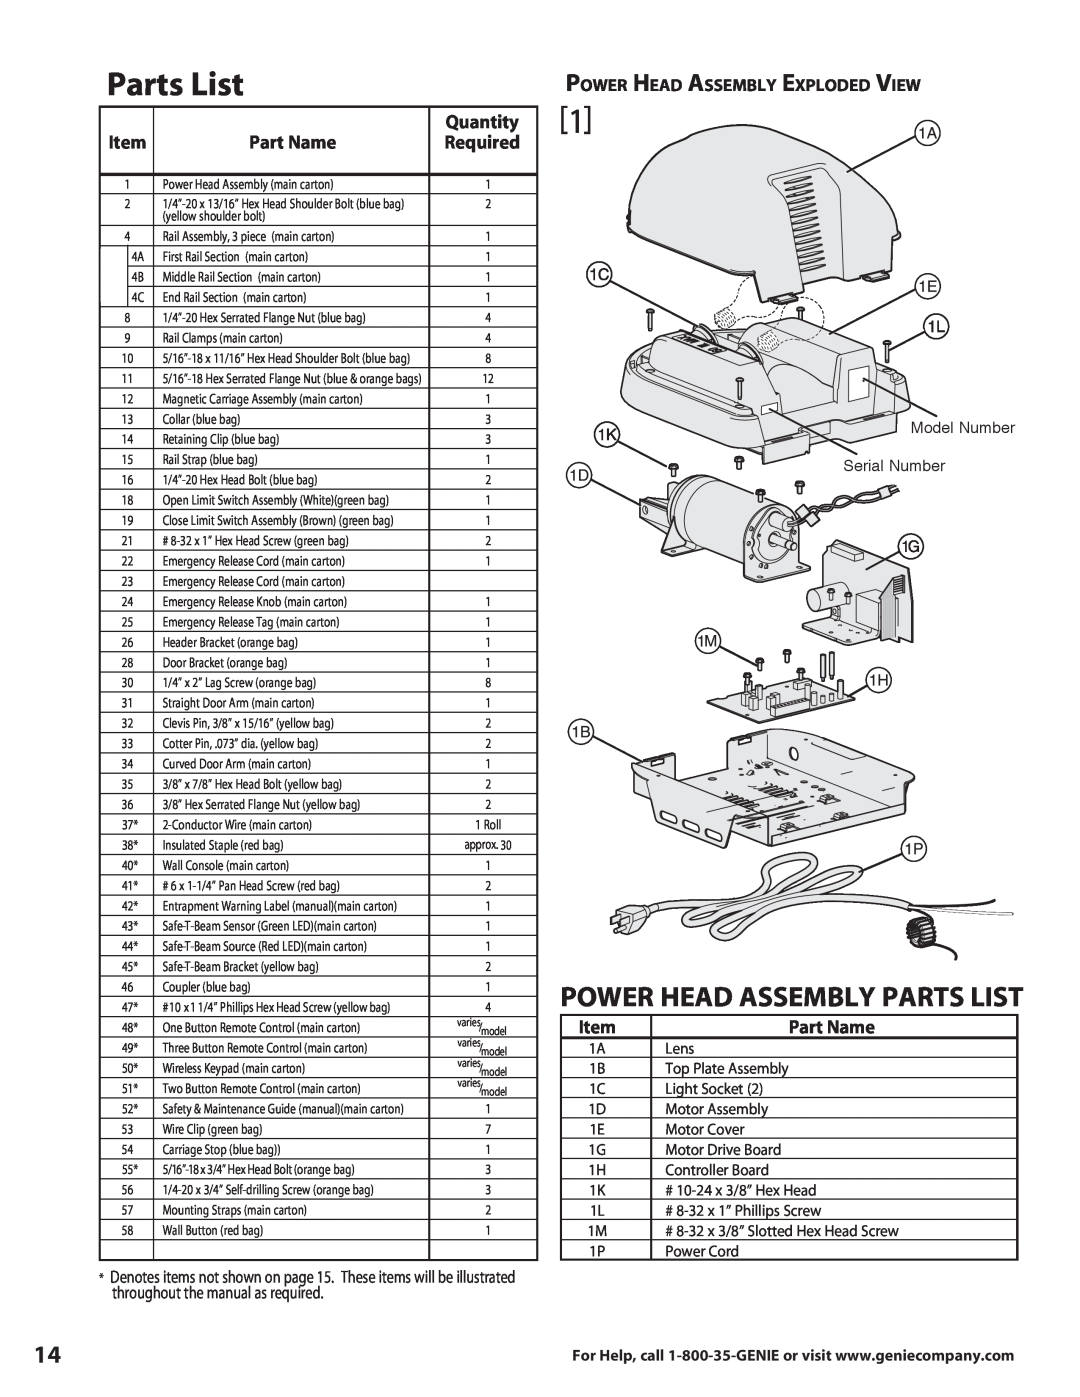 Genie 3627336241 warranty Power Head Assembly Parts List, Part Name, Quantity, Required 